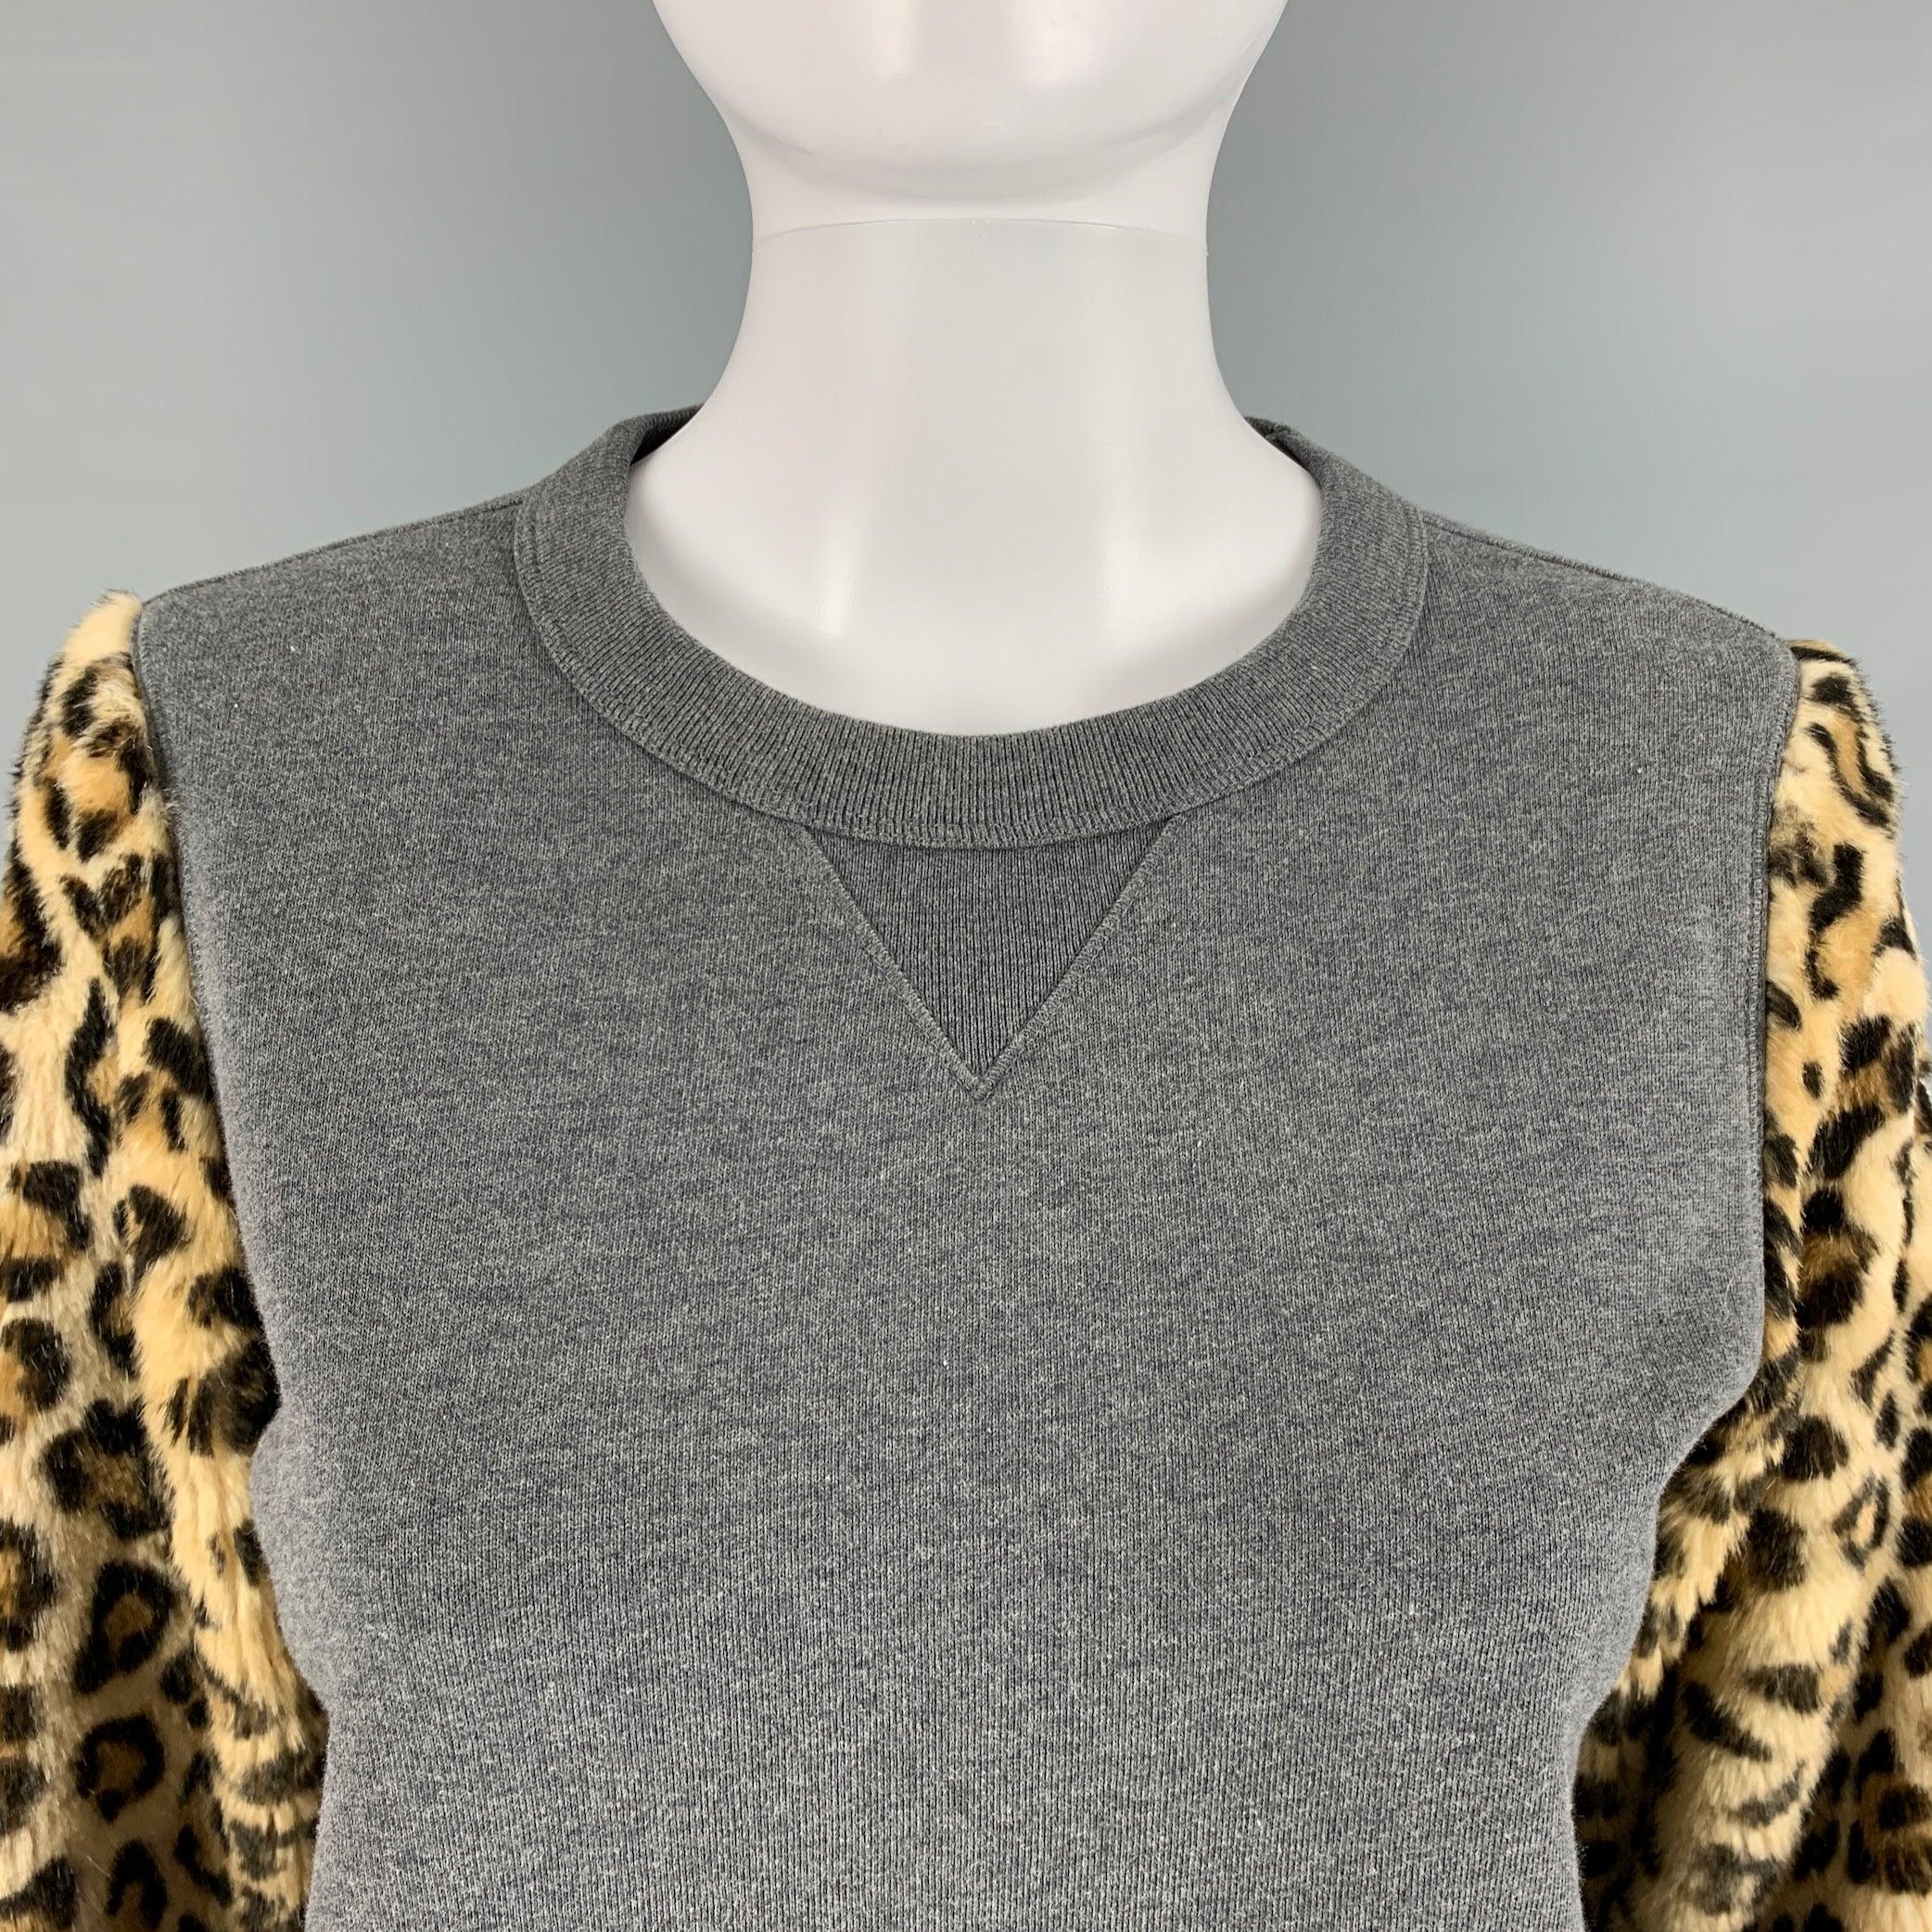 DRIES VAN NOTEN sweater comes in a heather grey french terry knit material featuring animal print faux fur sleeves, and a ribbed crew-neck. Excellent Pre-Owned Condition. 

Marked:   Extra Small 

Measurements: 
 
Shoulder: 15 inches  Chest: 37